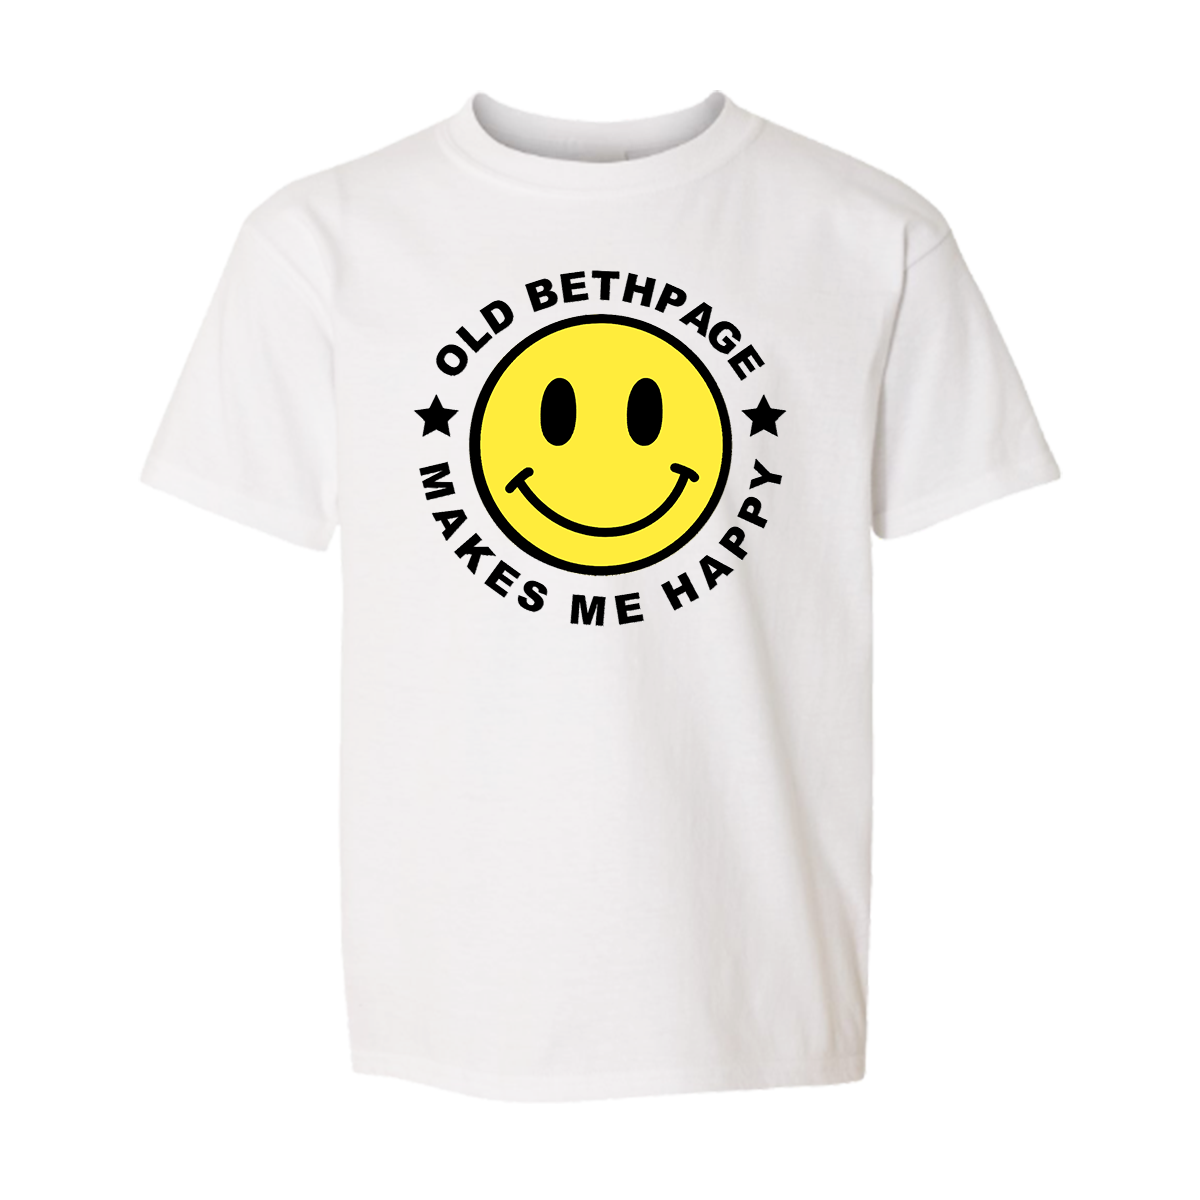 Old Bethpage Makes Me Happy T-Shirt